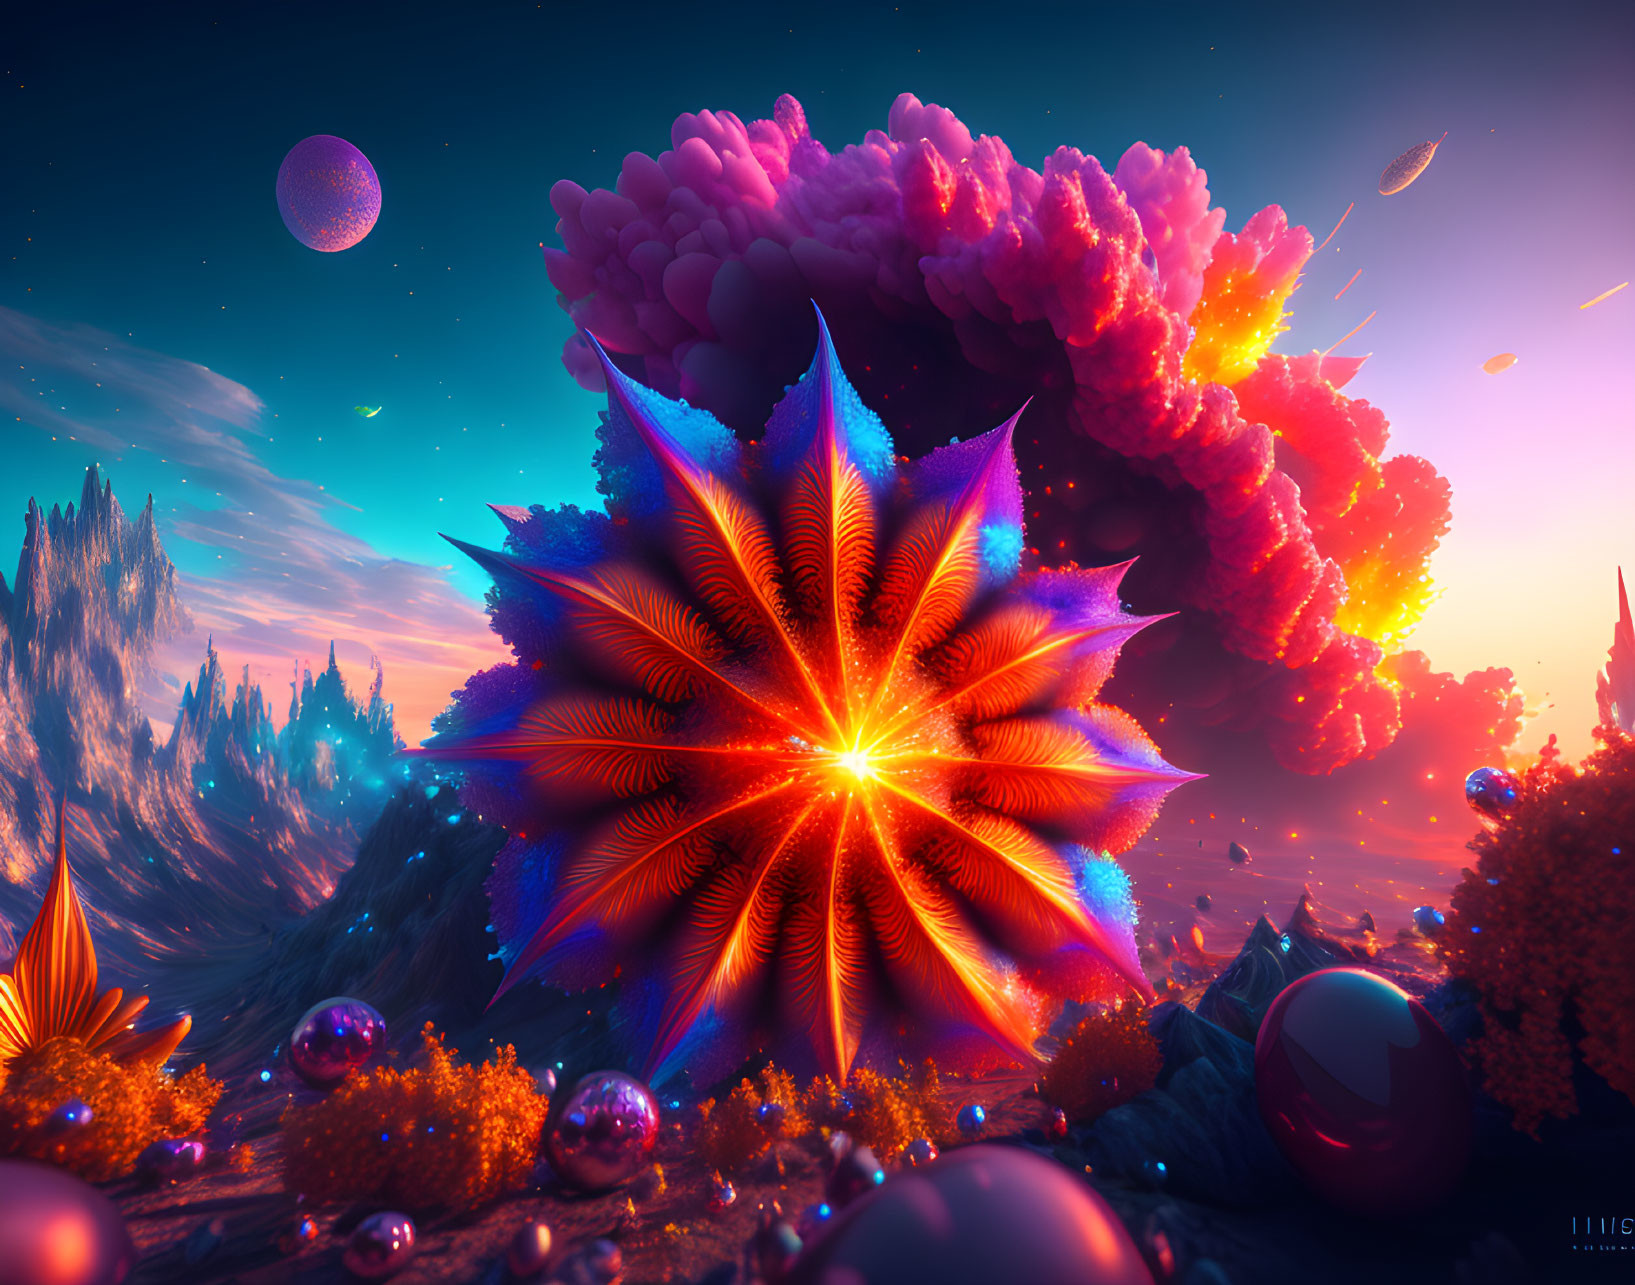 Colorful surreal landscape with radiant flower, luminous trees, orbs, and cosmic sky